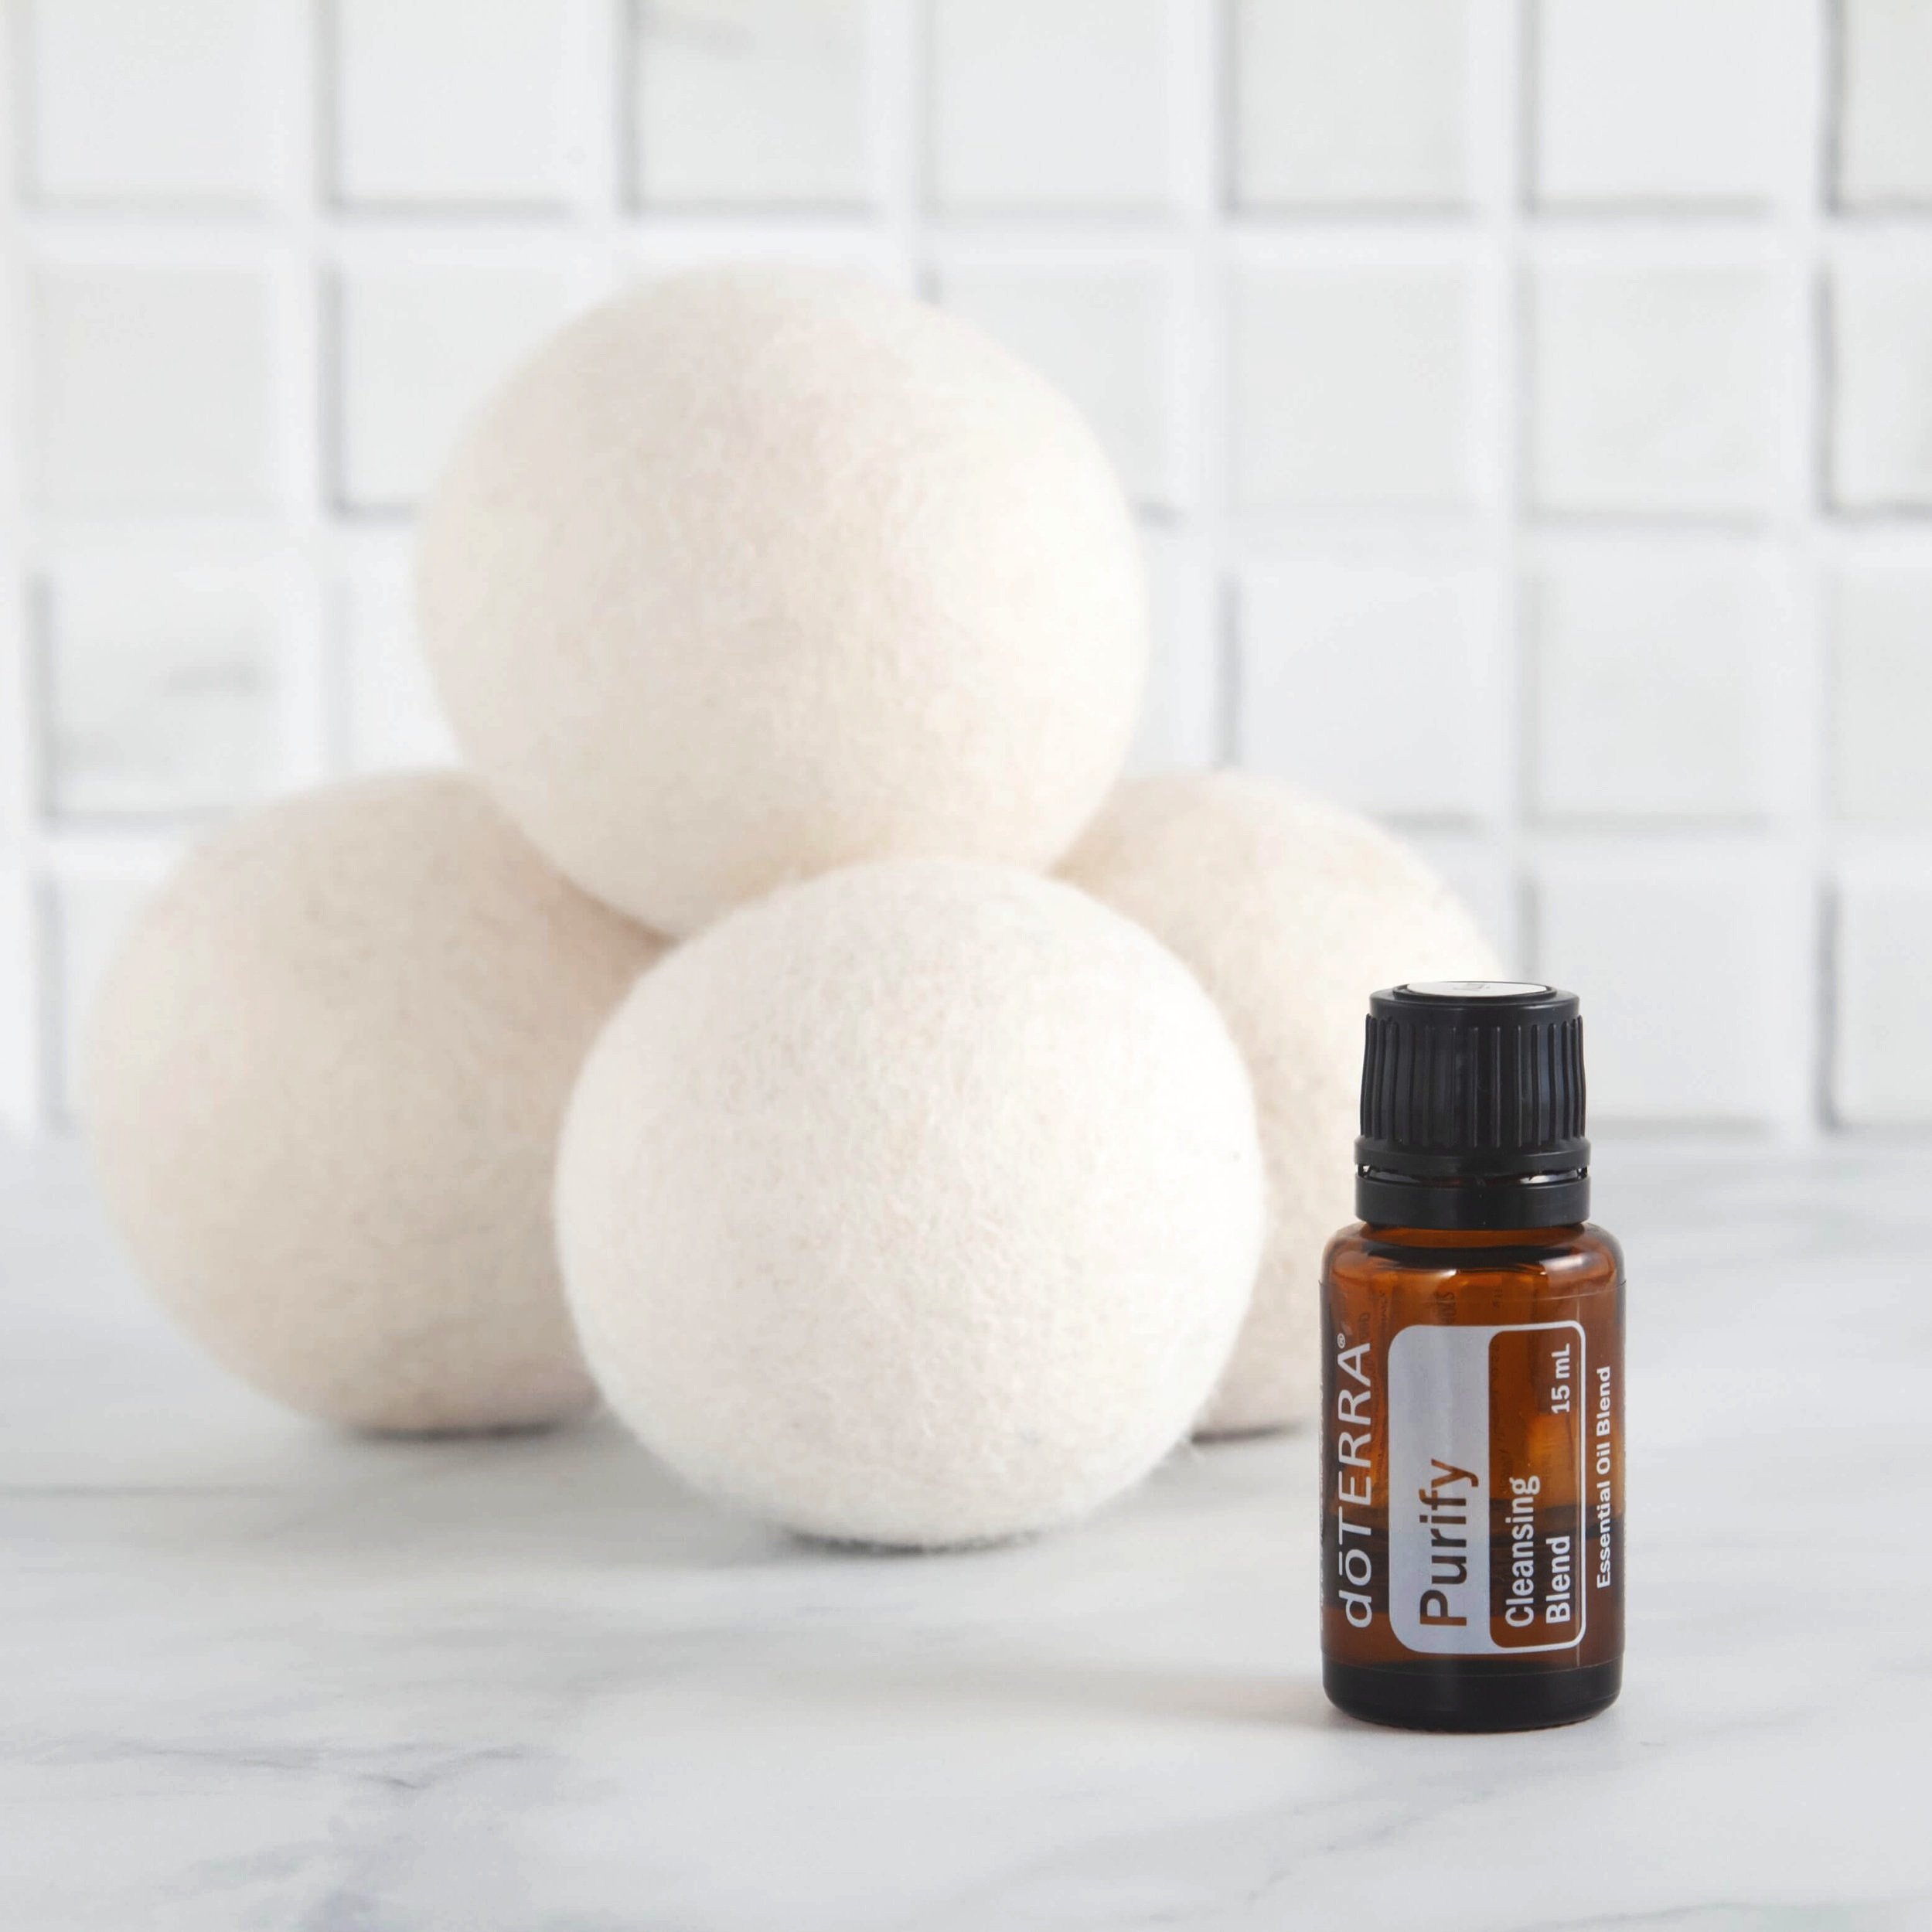 Natural+Laundry+Products+Dryer+Ball+Essential+Oil+doTERRA.jpg